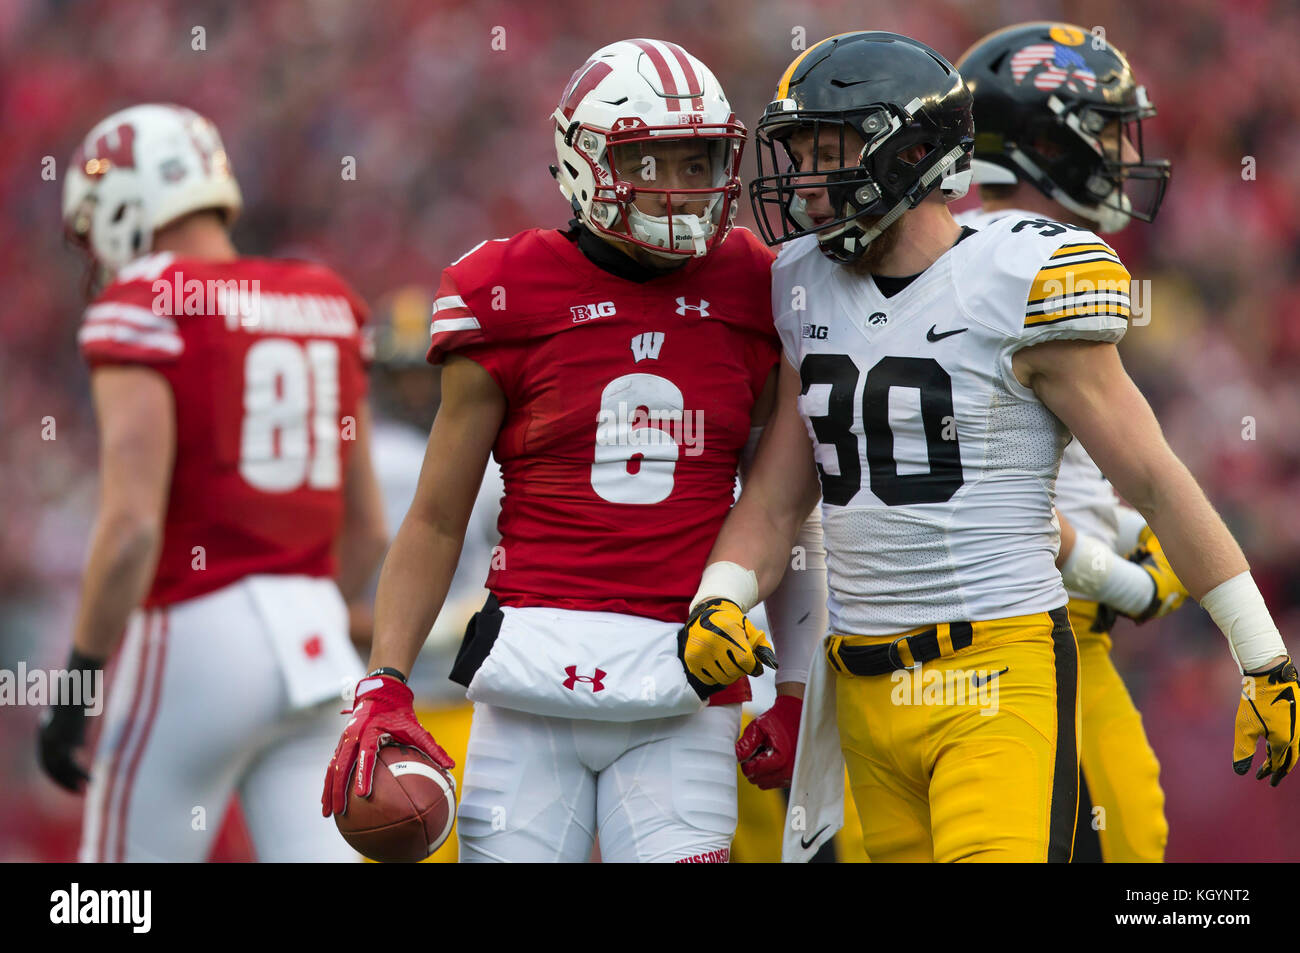 Madison, WI, USA. 11th Nov, 2017. Wisconsin Badgers wide receiver Danny Davis III #6 reacts after a 16 yard catch during the NCAA Football game between the Iowa Hawkeyes and the Wisconsin Badgers at Camp Randall Stadium in Madison, WI. Wisconsin defeated Iowa 38-14. John Fisher/CSM/Alamy Live News Stock Photo